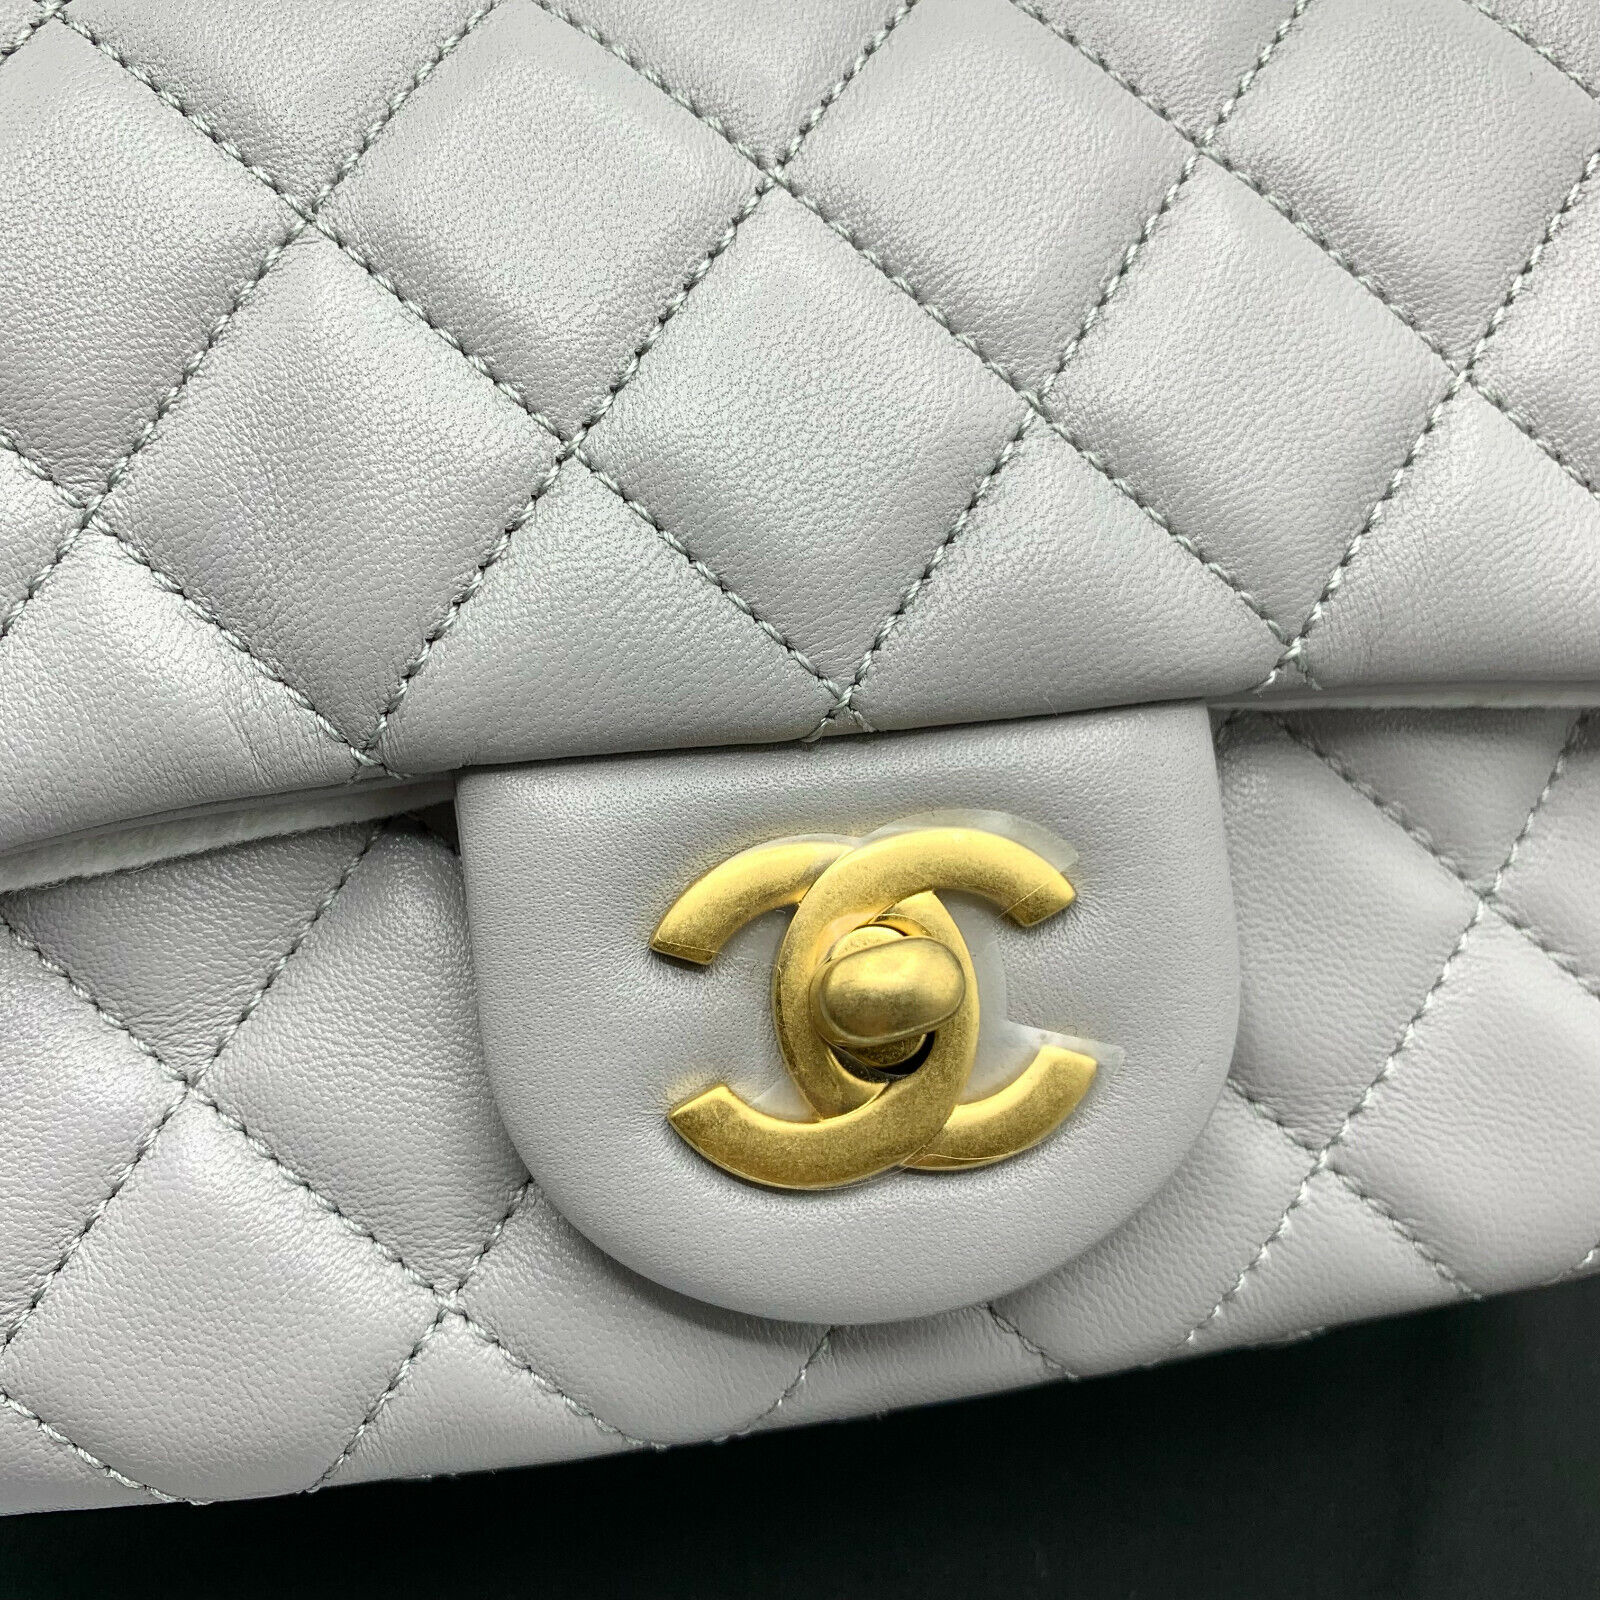 Chanel Pearl Crush Vanity Case 21B Gray Quilted Lambskin with brushed gold  hardware